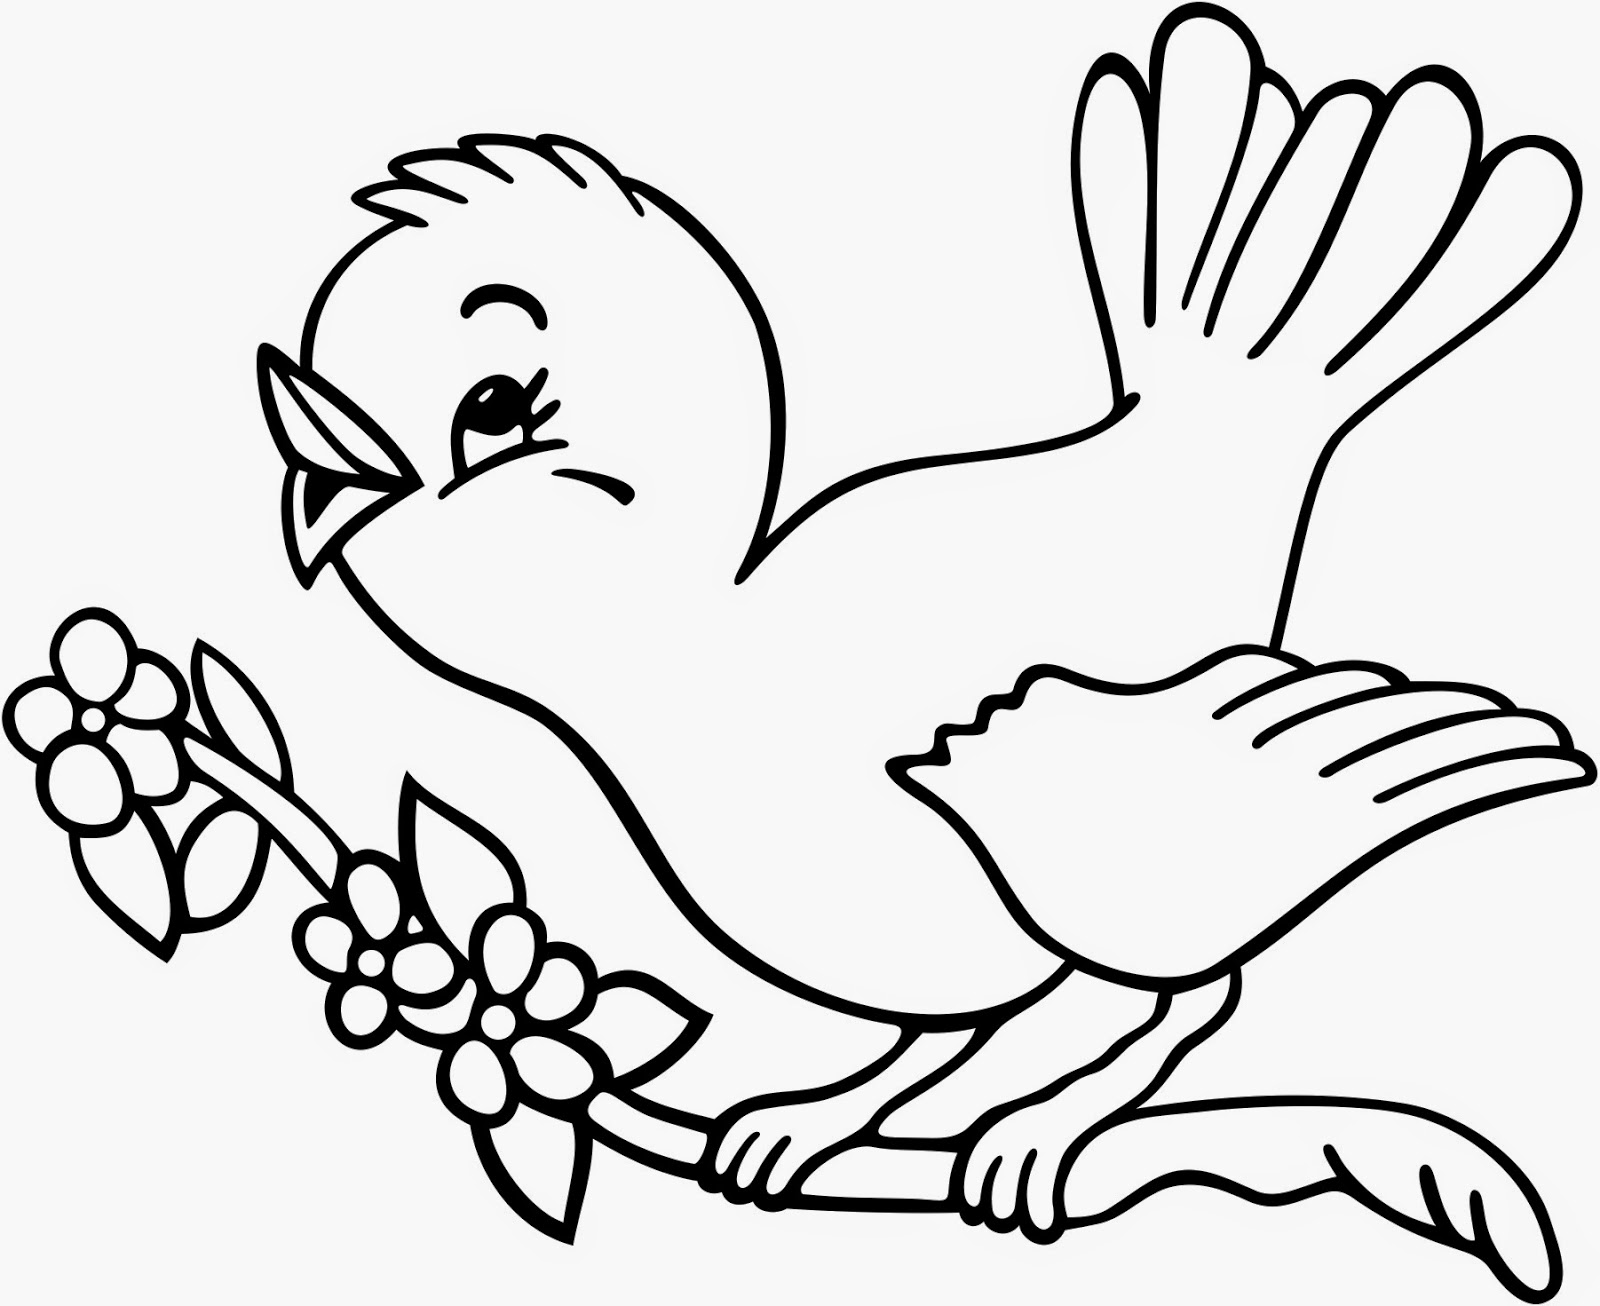 Free Coloring Pages Of Little Bird Coloring Wallpapers Download Free Images Wallpaper [coloring654.blogspot.com]